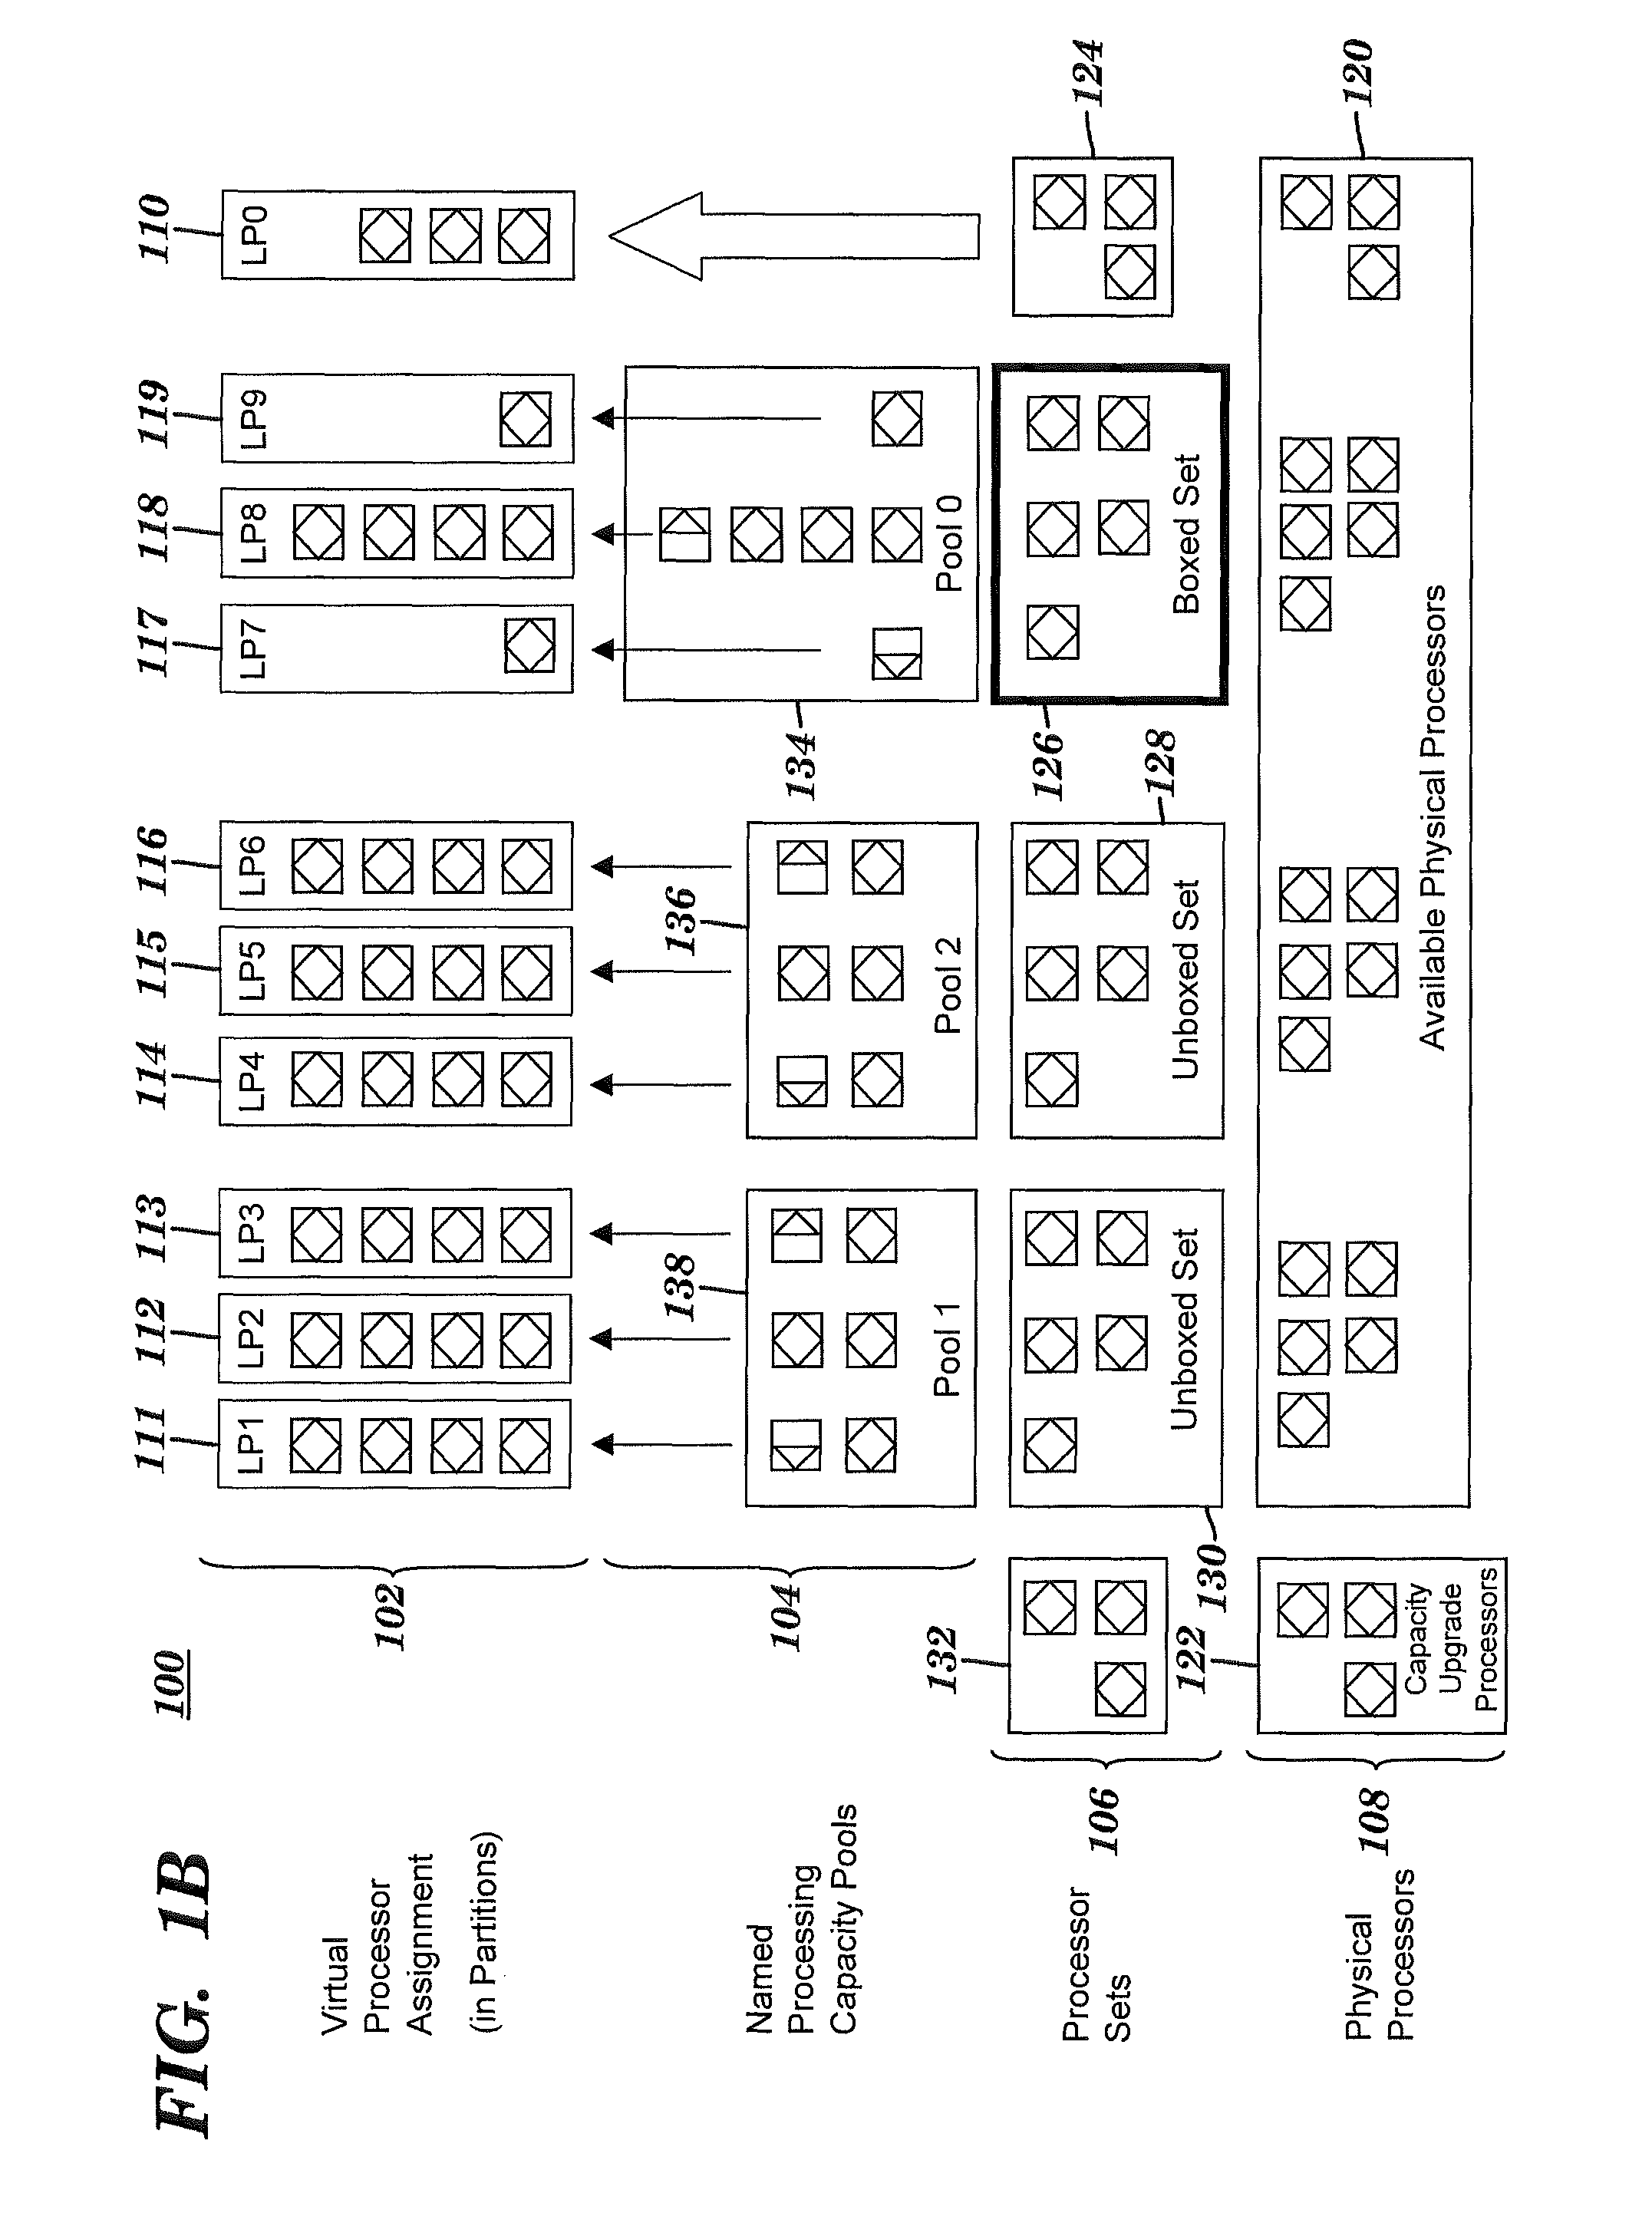 Method and system for assigning logical partitions to multiple shared processor pools